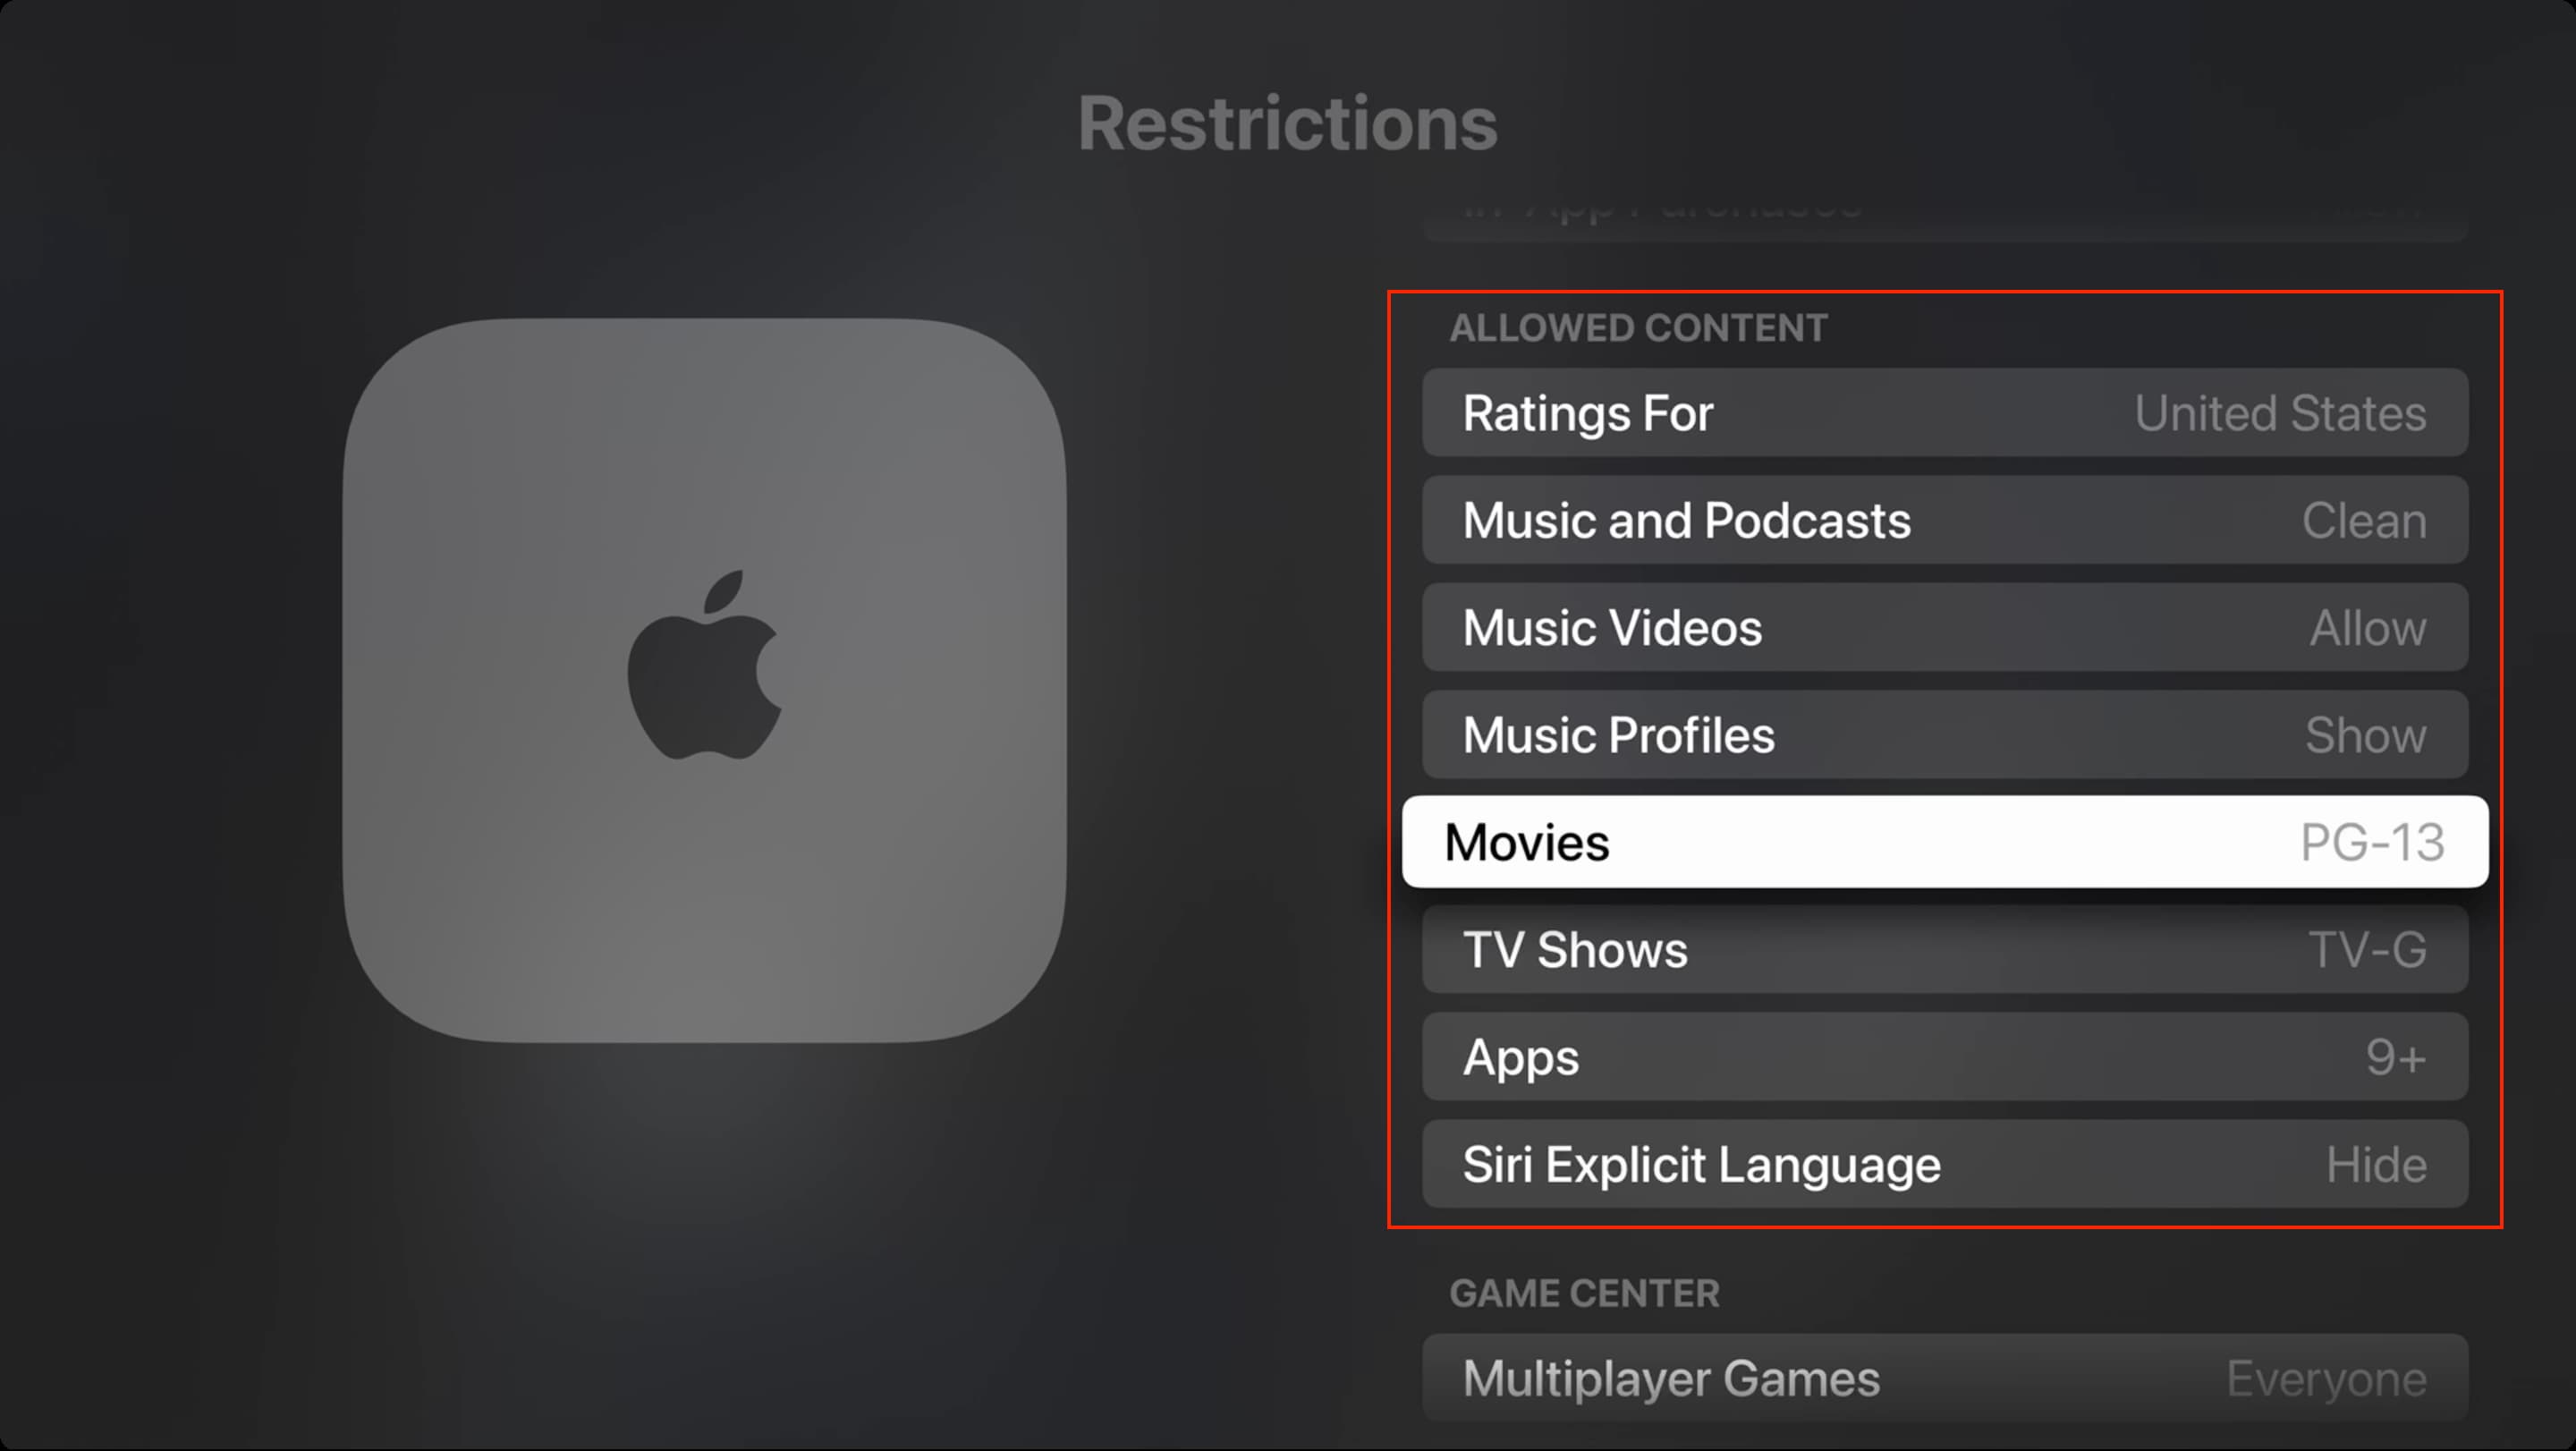 Movie, TV Show, Music and other restrictions on Apple TV to make them child-appropriate